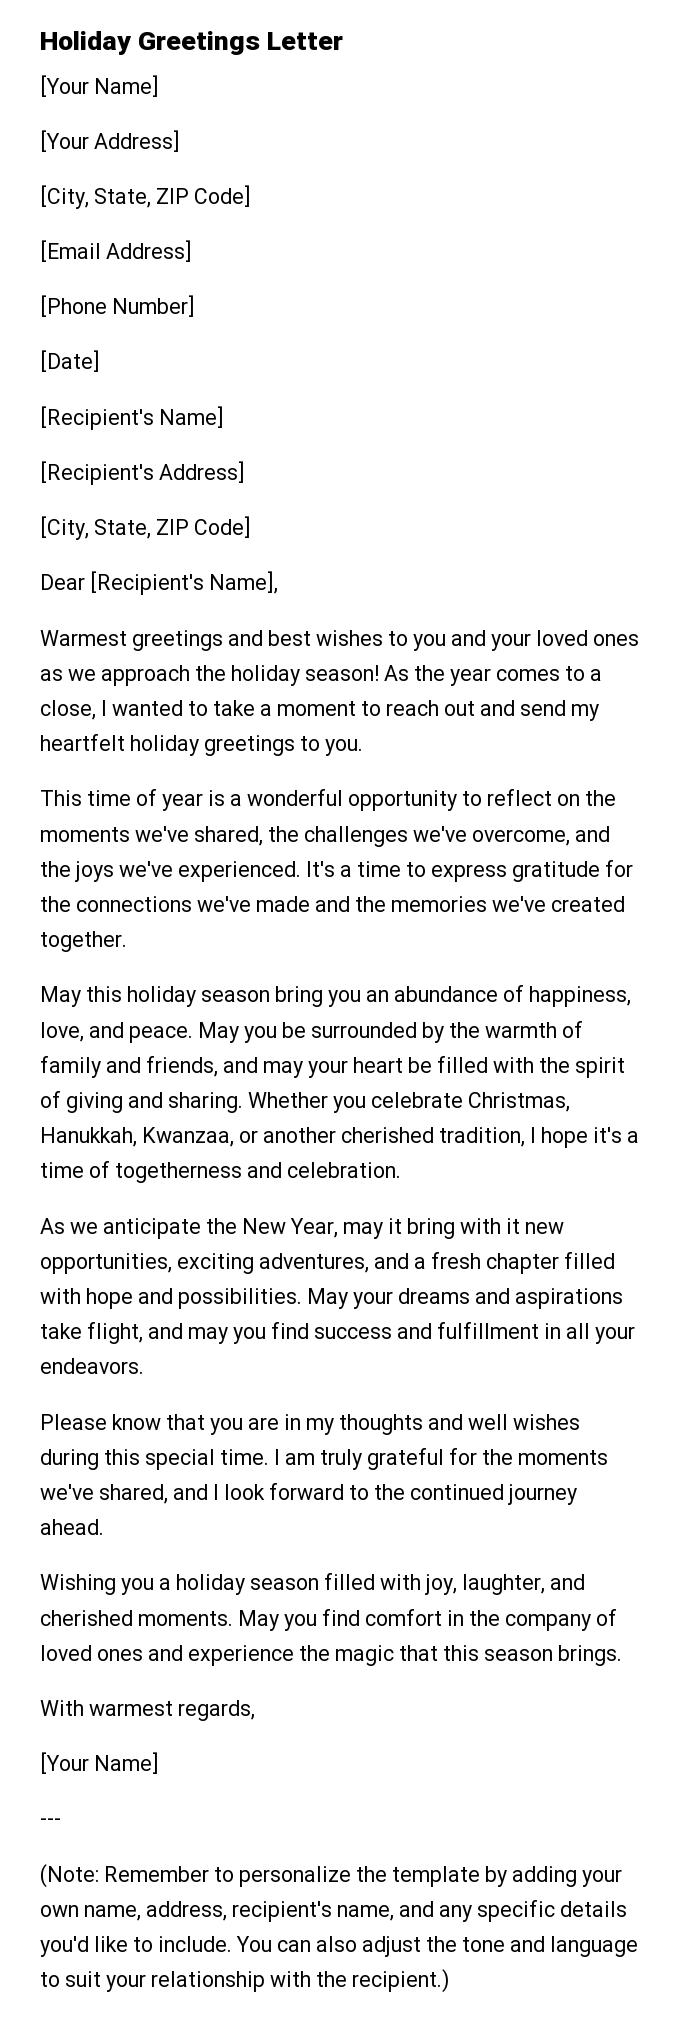 Holiday Greetings Letter